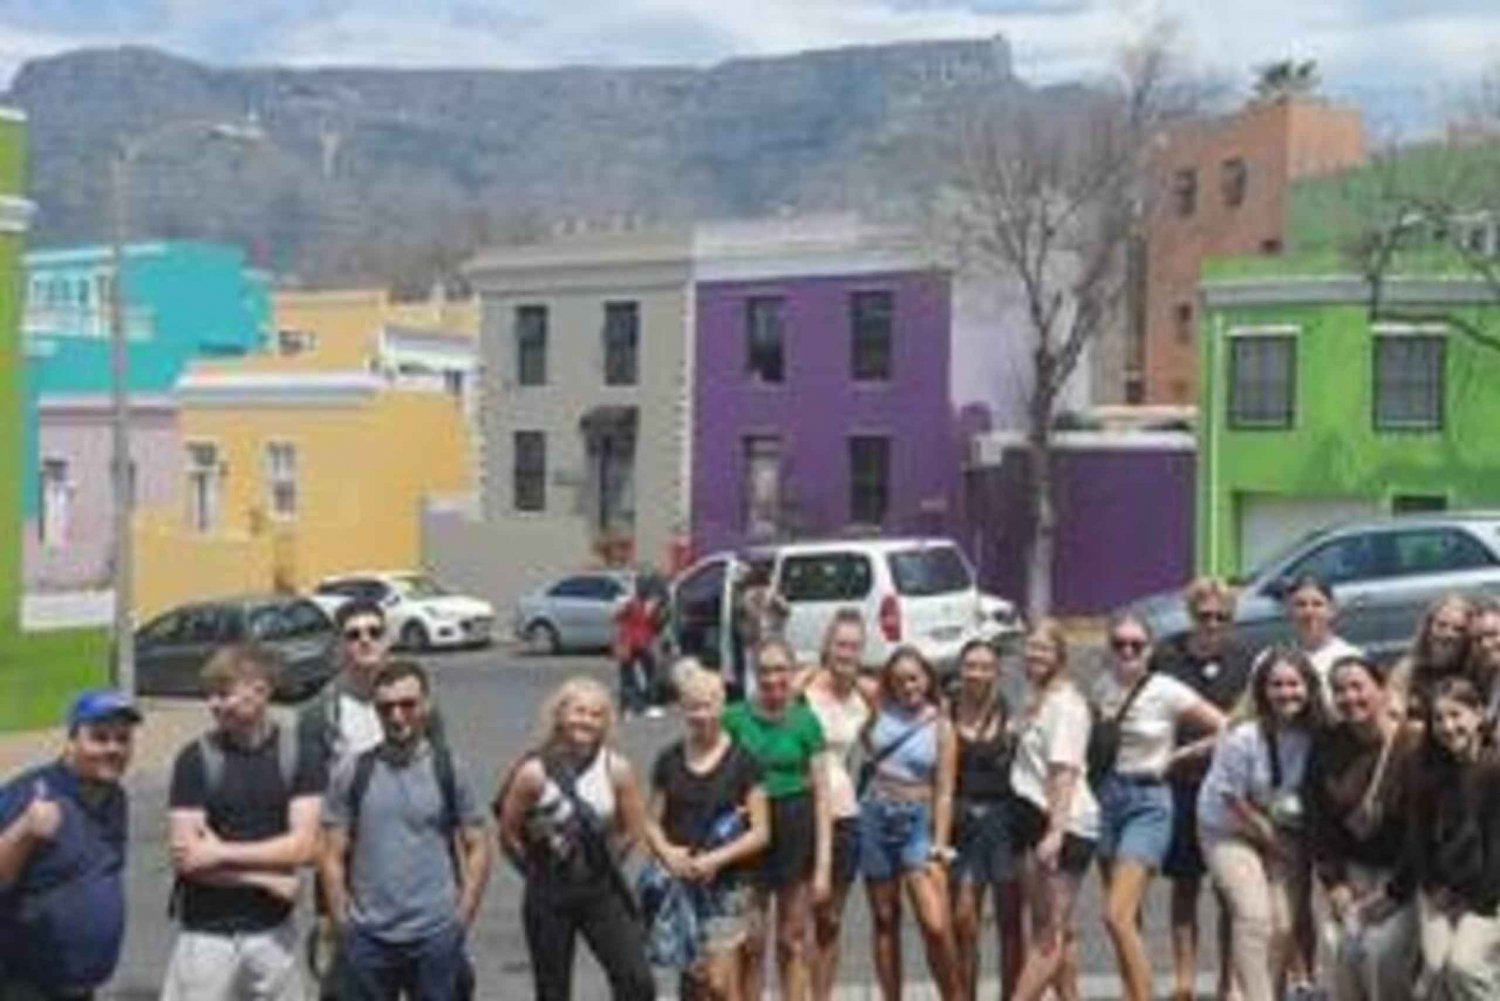 Bo-Kaap community Walking Tour (includes a local experience)